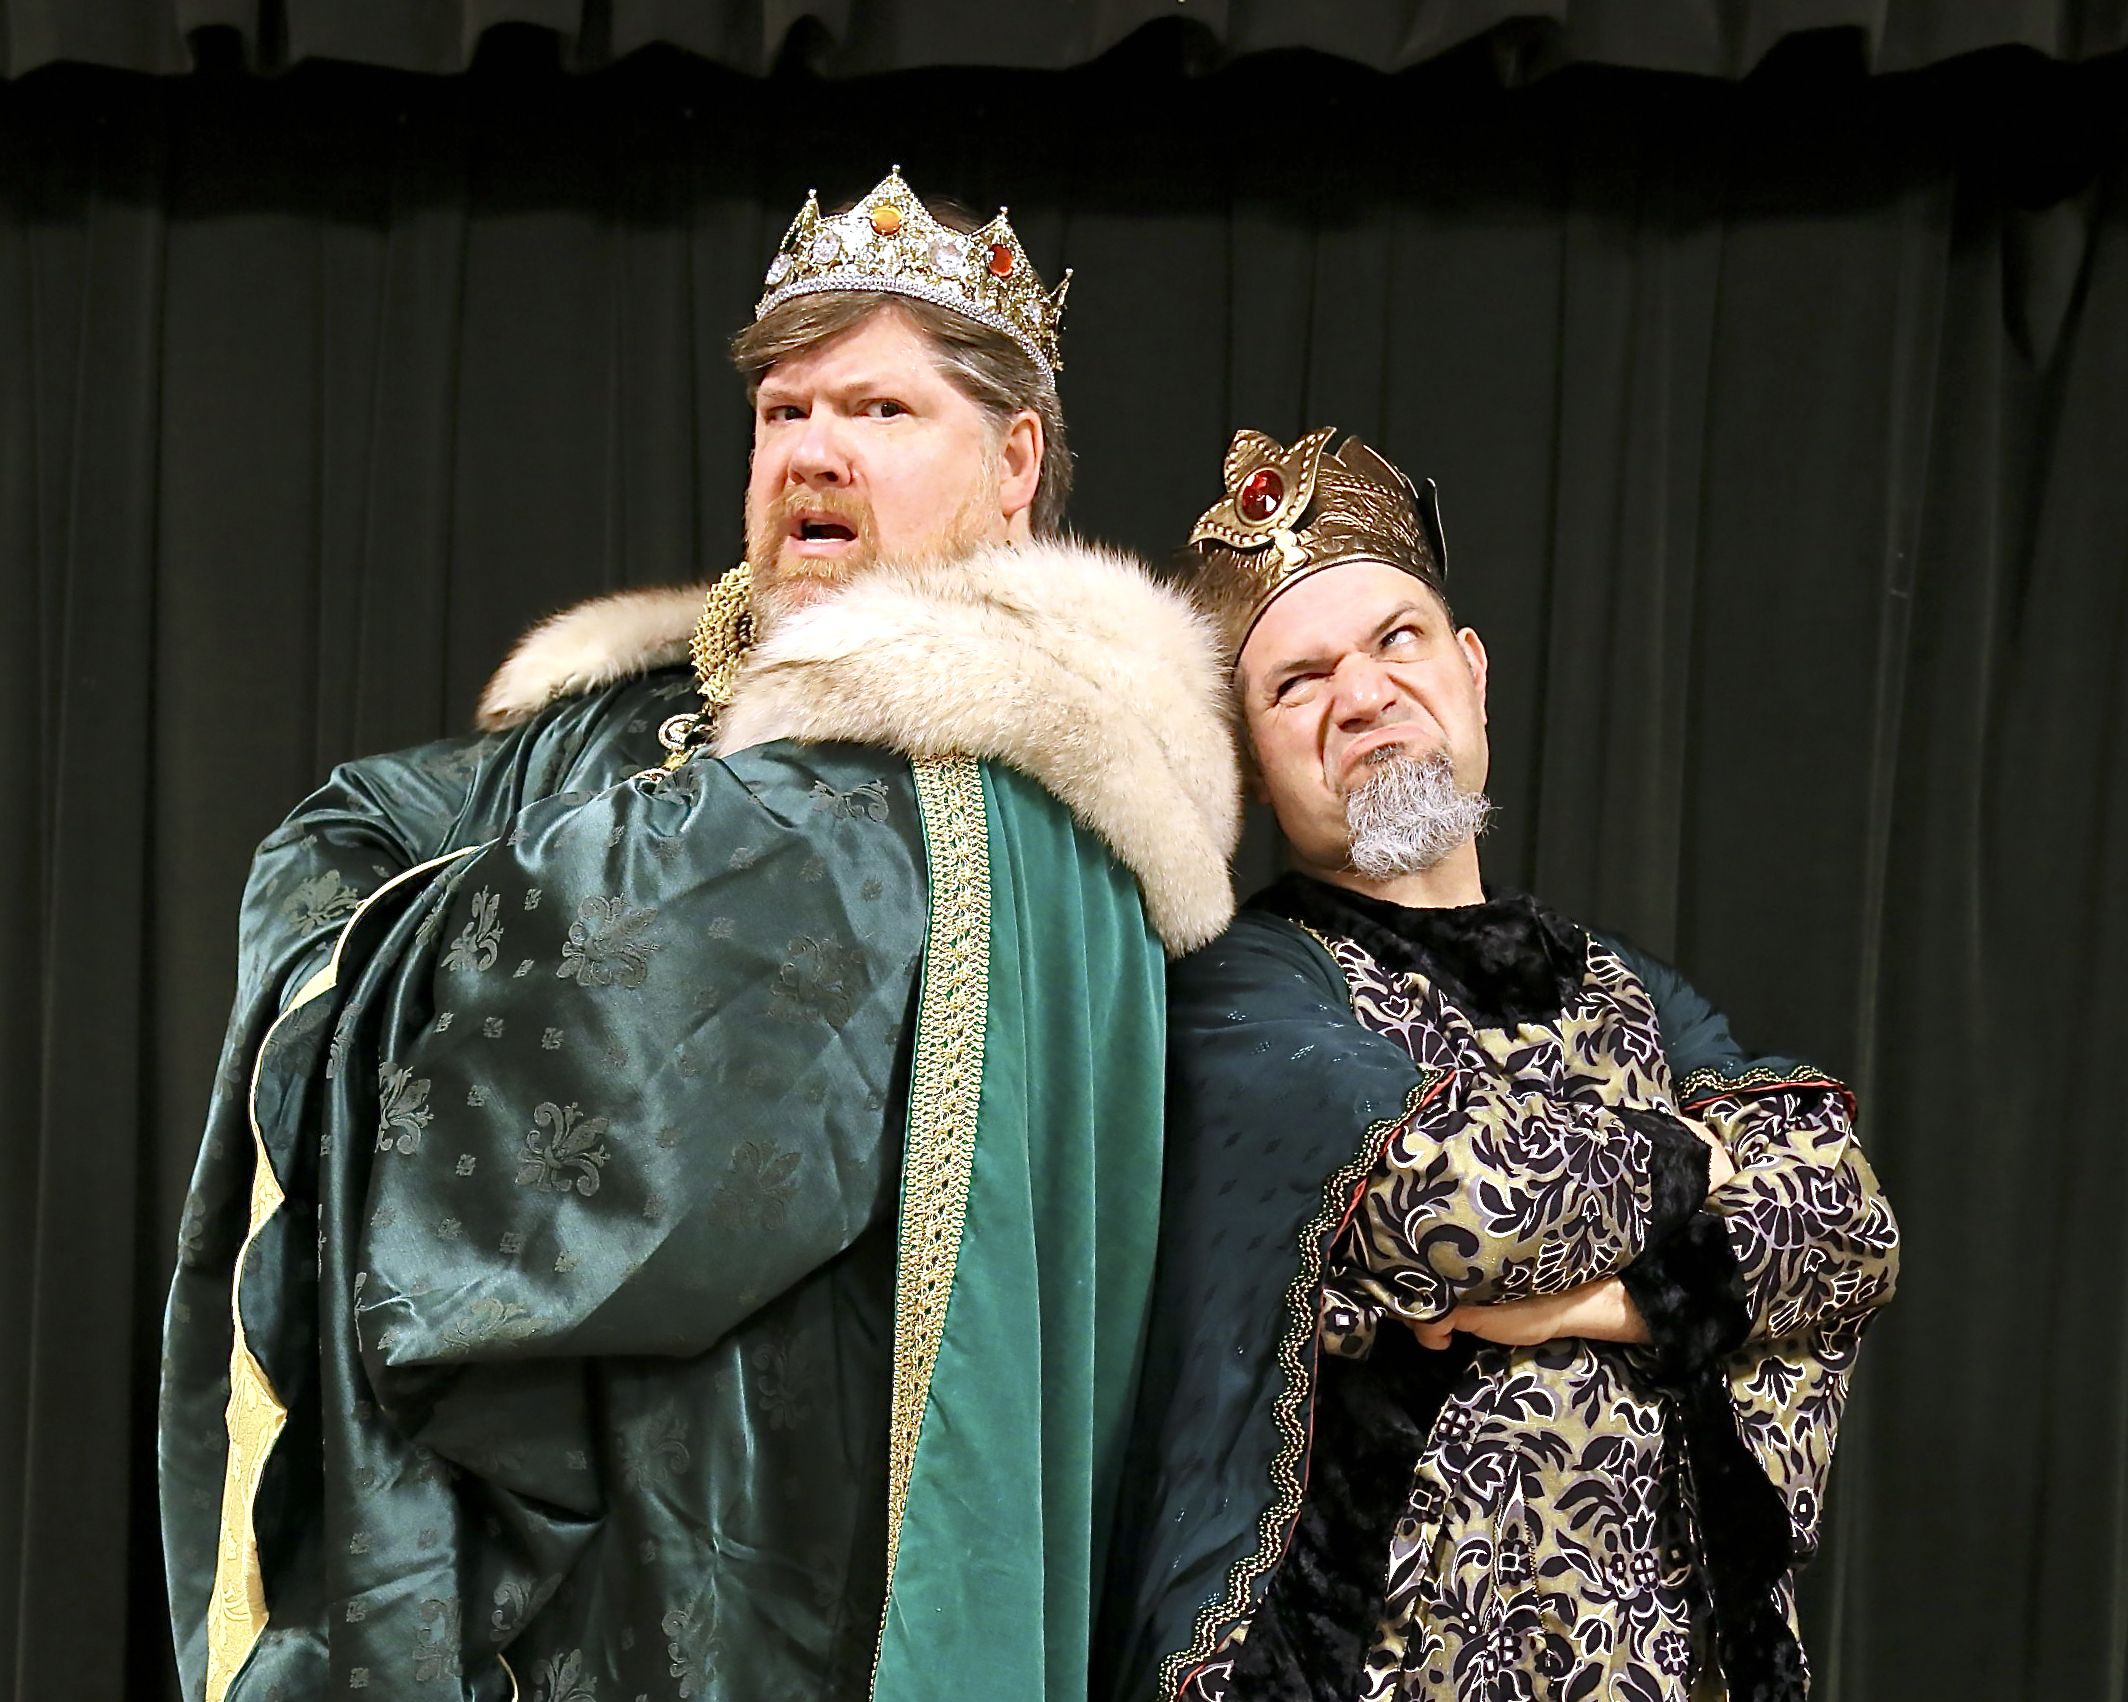 The picture below from Left to Right: Ben Salers (King Hildebrand) and Chris Jurak (King Gama) Dark Curtain Background. King Gama is a red headed and bearded man decked in elaborate emerald green and gold garments with a fur topped cape and gold crown with red jewels. King Gama is grey goateed man in black and gold garments and a dark green cape. He wears a copper crown with 4 large red jewels around. Both stand back to back- looking at each other with particular disgust. 